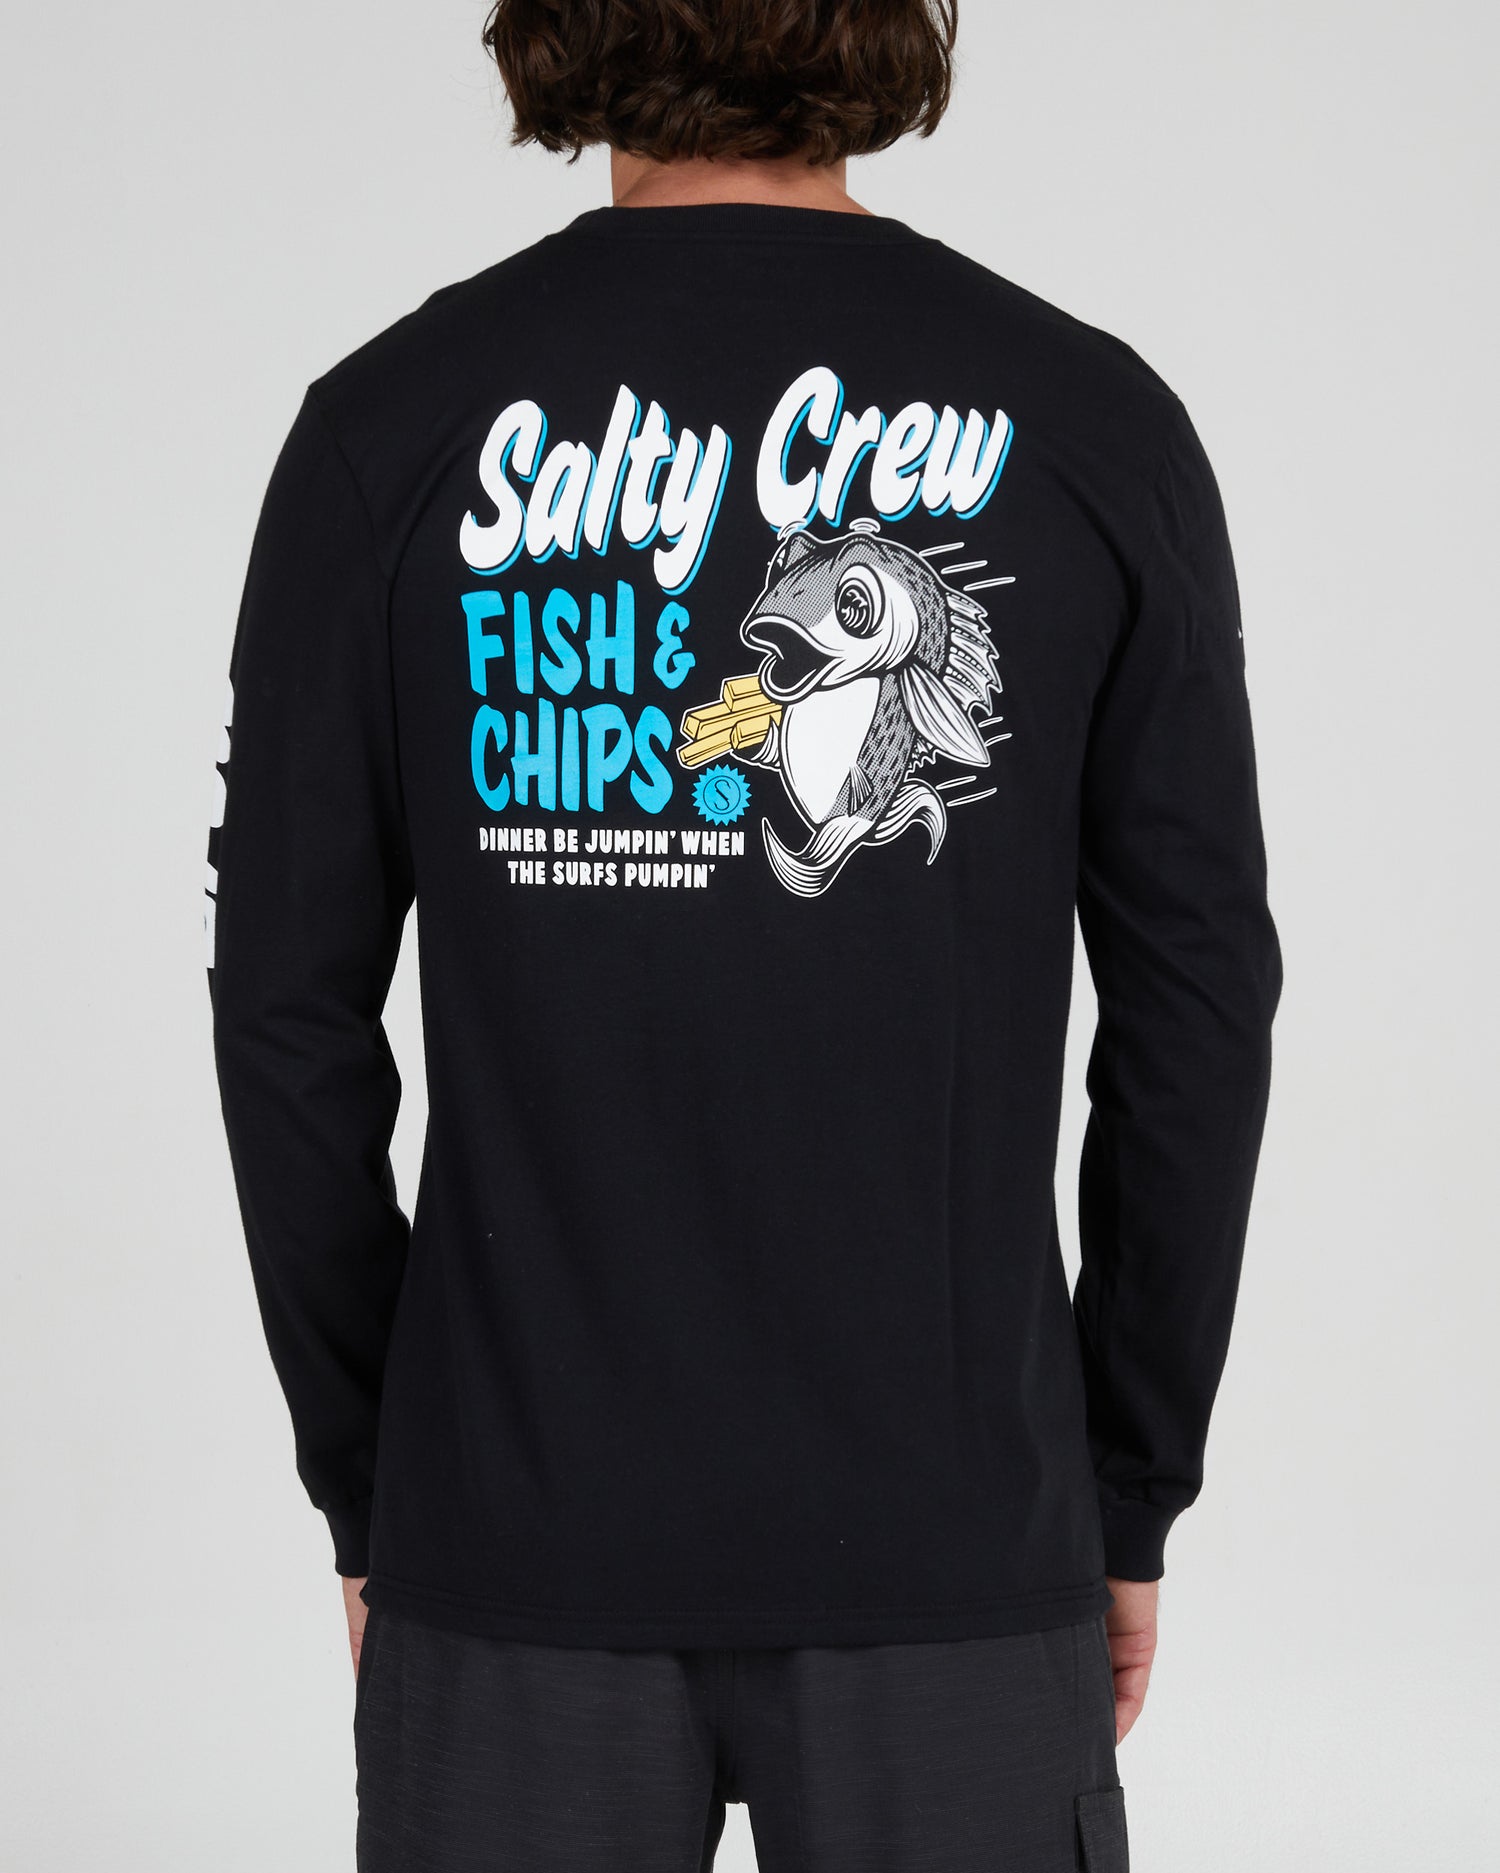 On body back of the Fish and Chips Black L/S Premium Tee